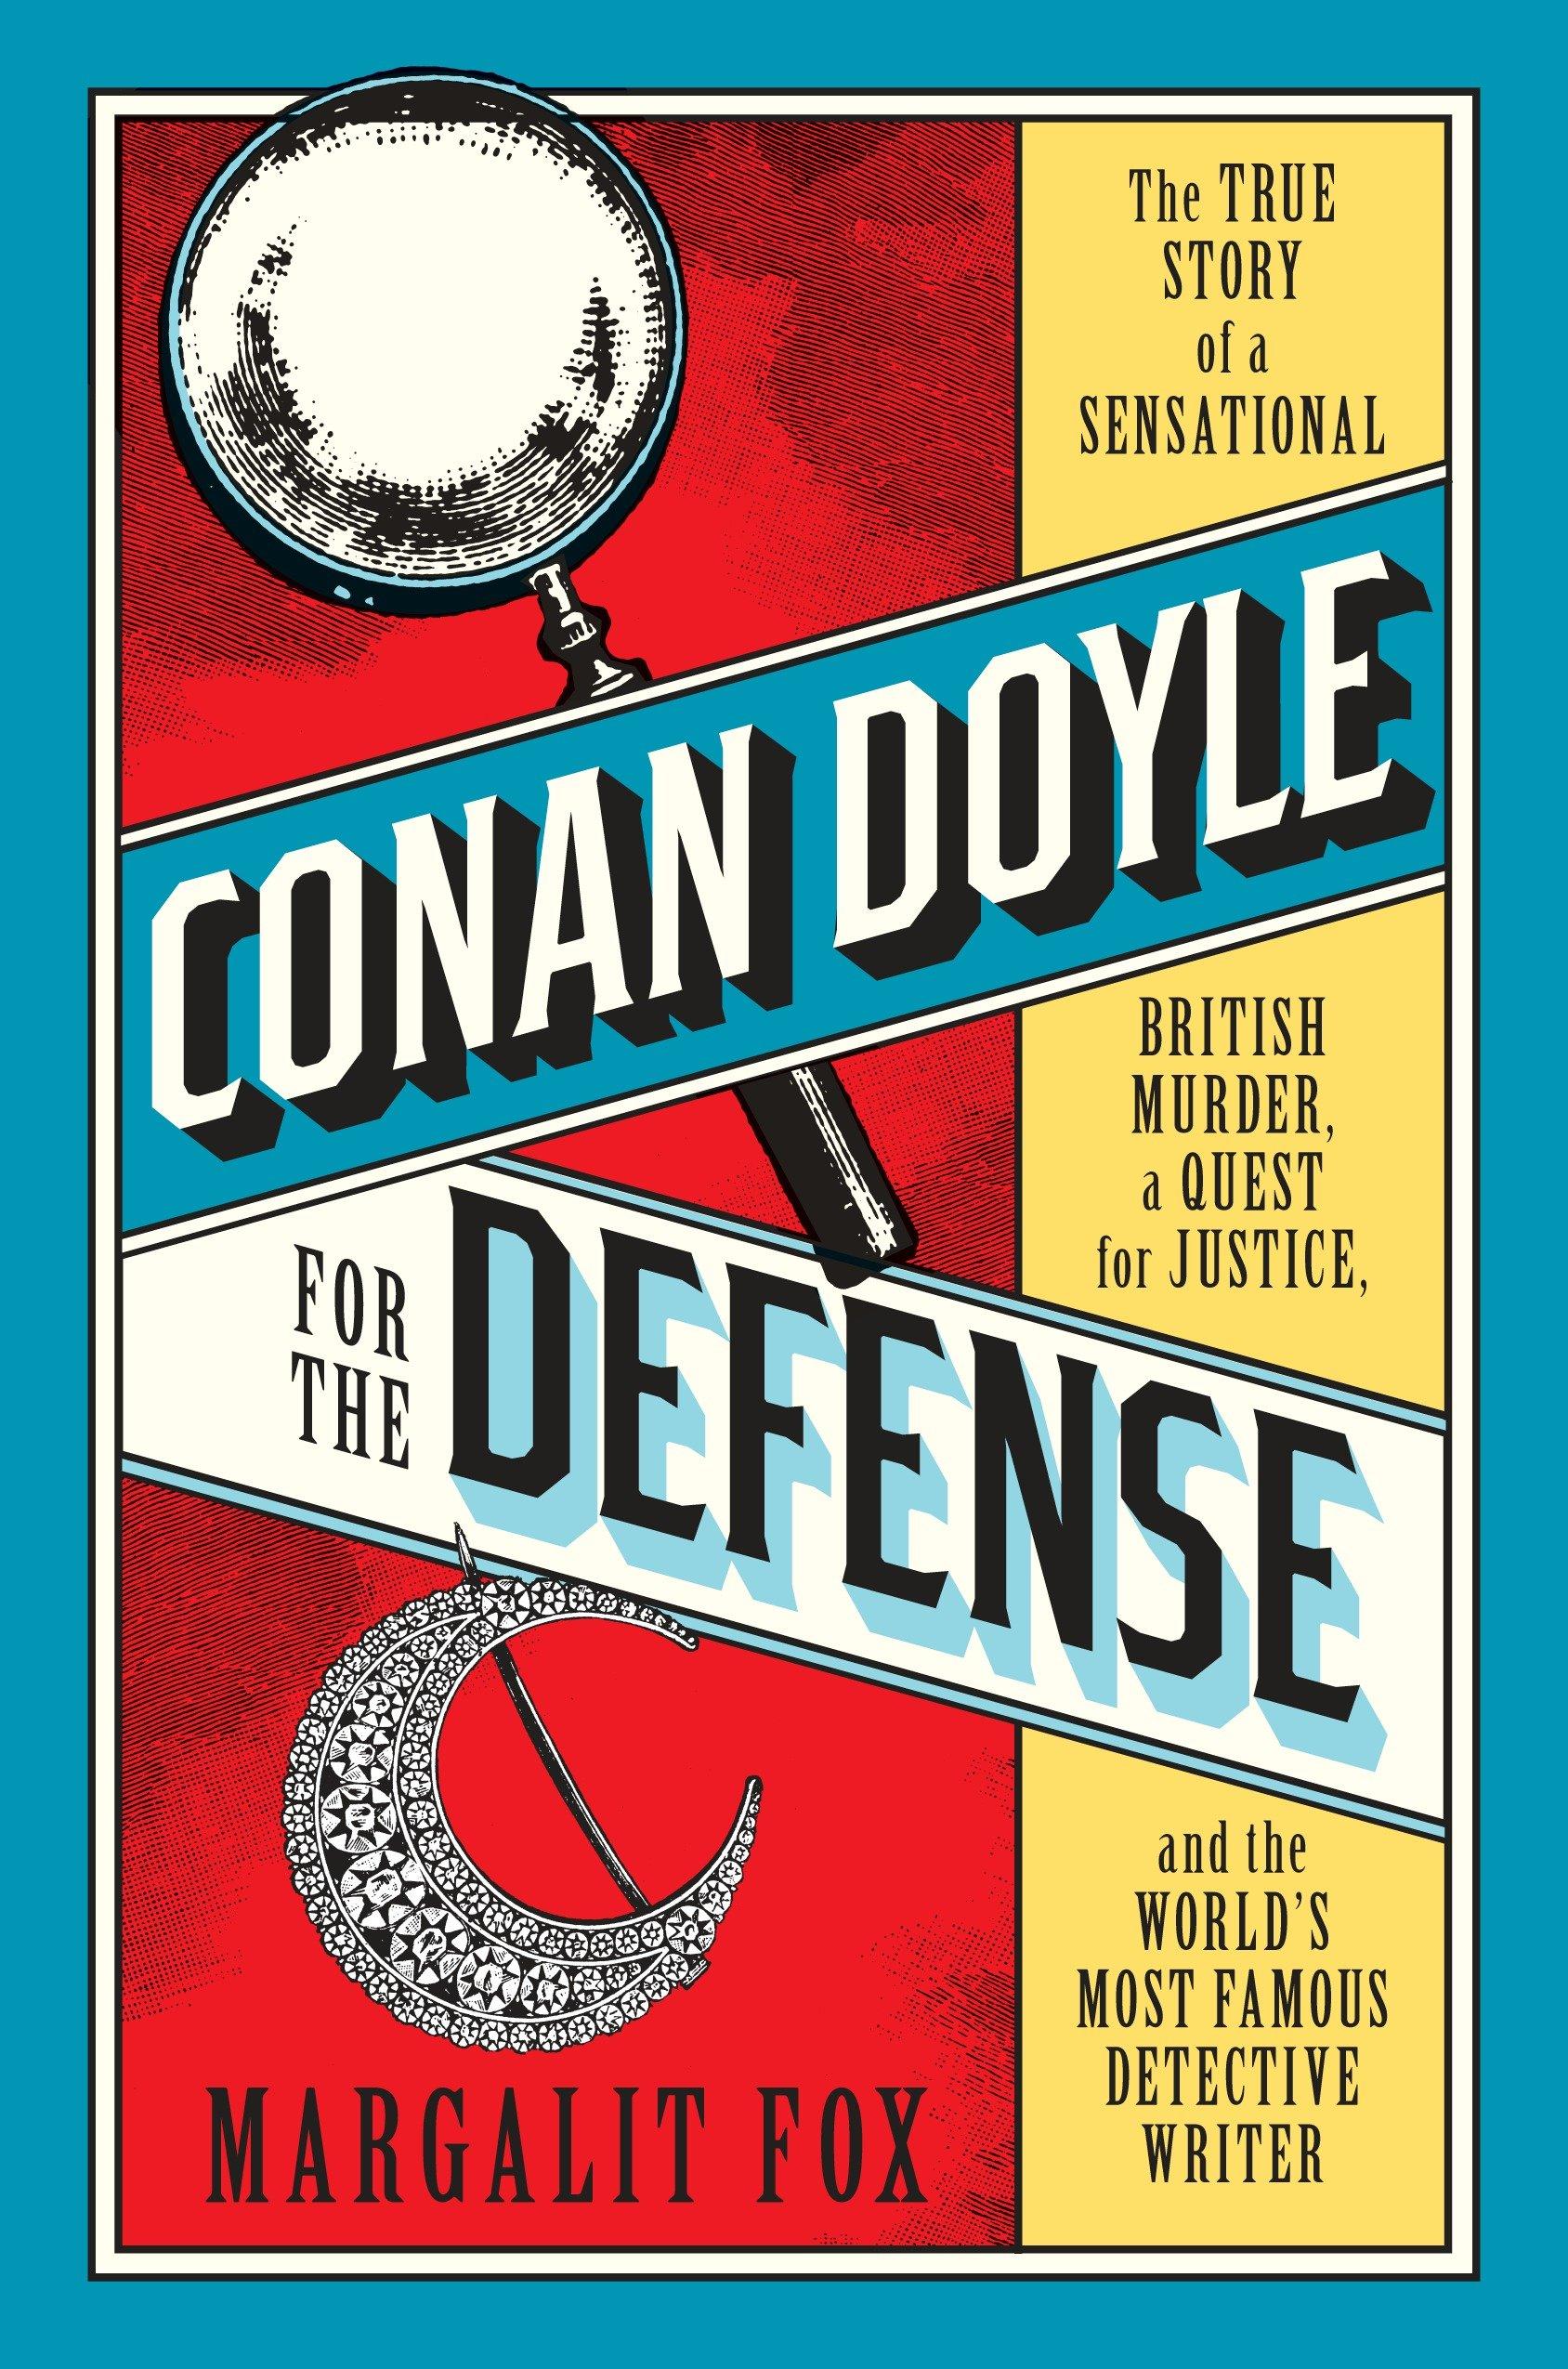 Fox, M: Conan Doyle for the Defense / The True Story of a Sensational British Murder, a Quest for Justice, and the World's Most Famous Detective Writer / Margalit Fox / Buch / Gebunden / Englisch - Fox, Margalit